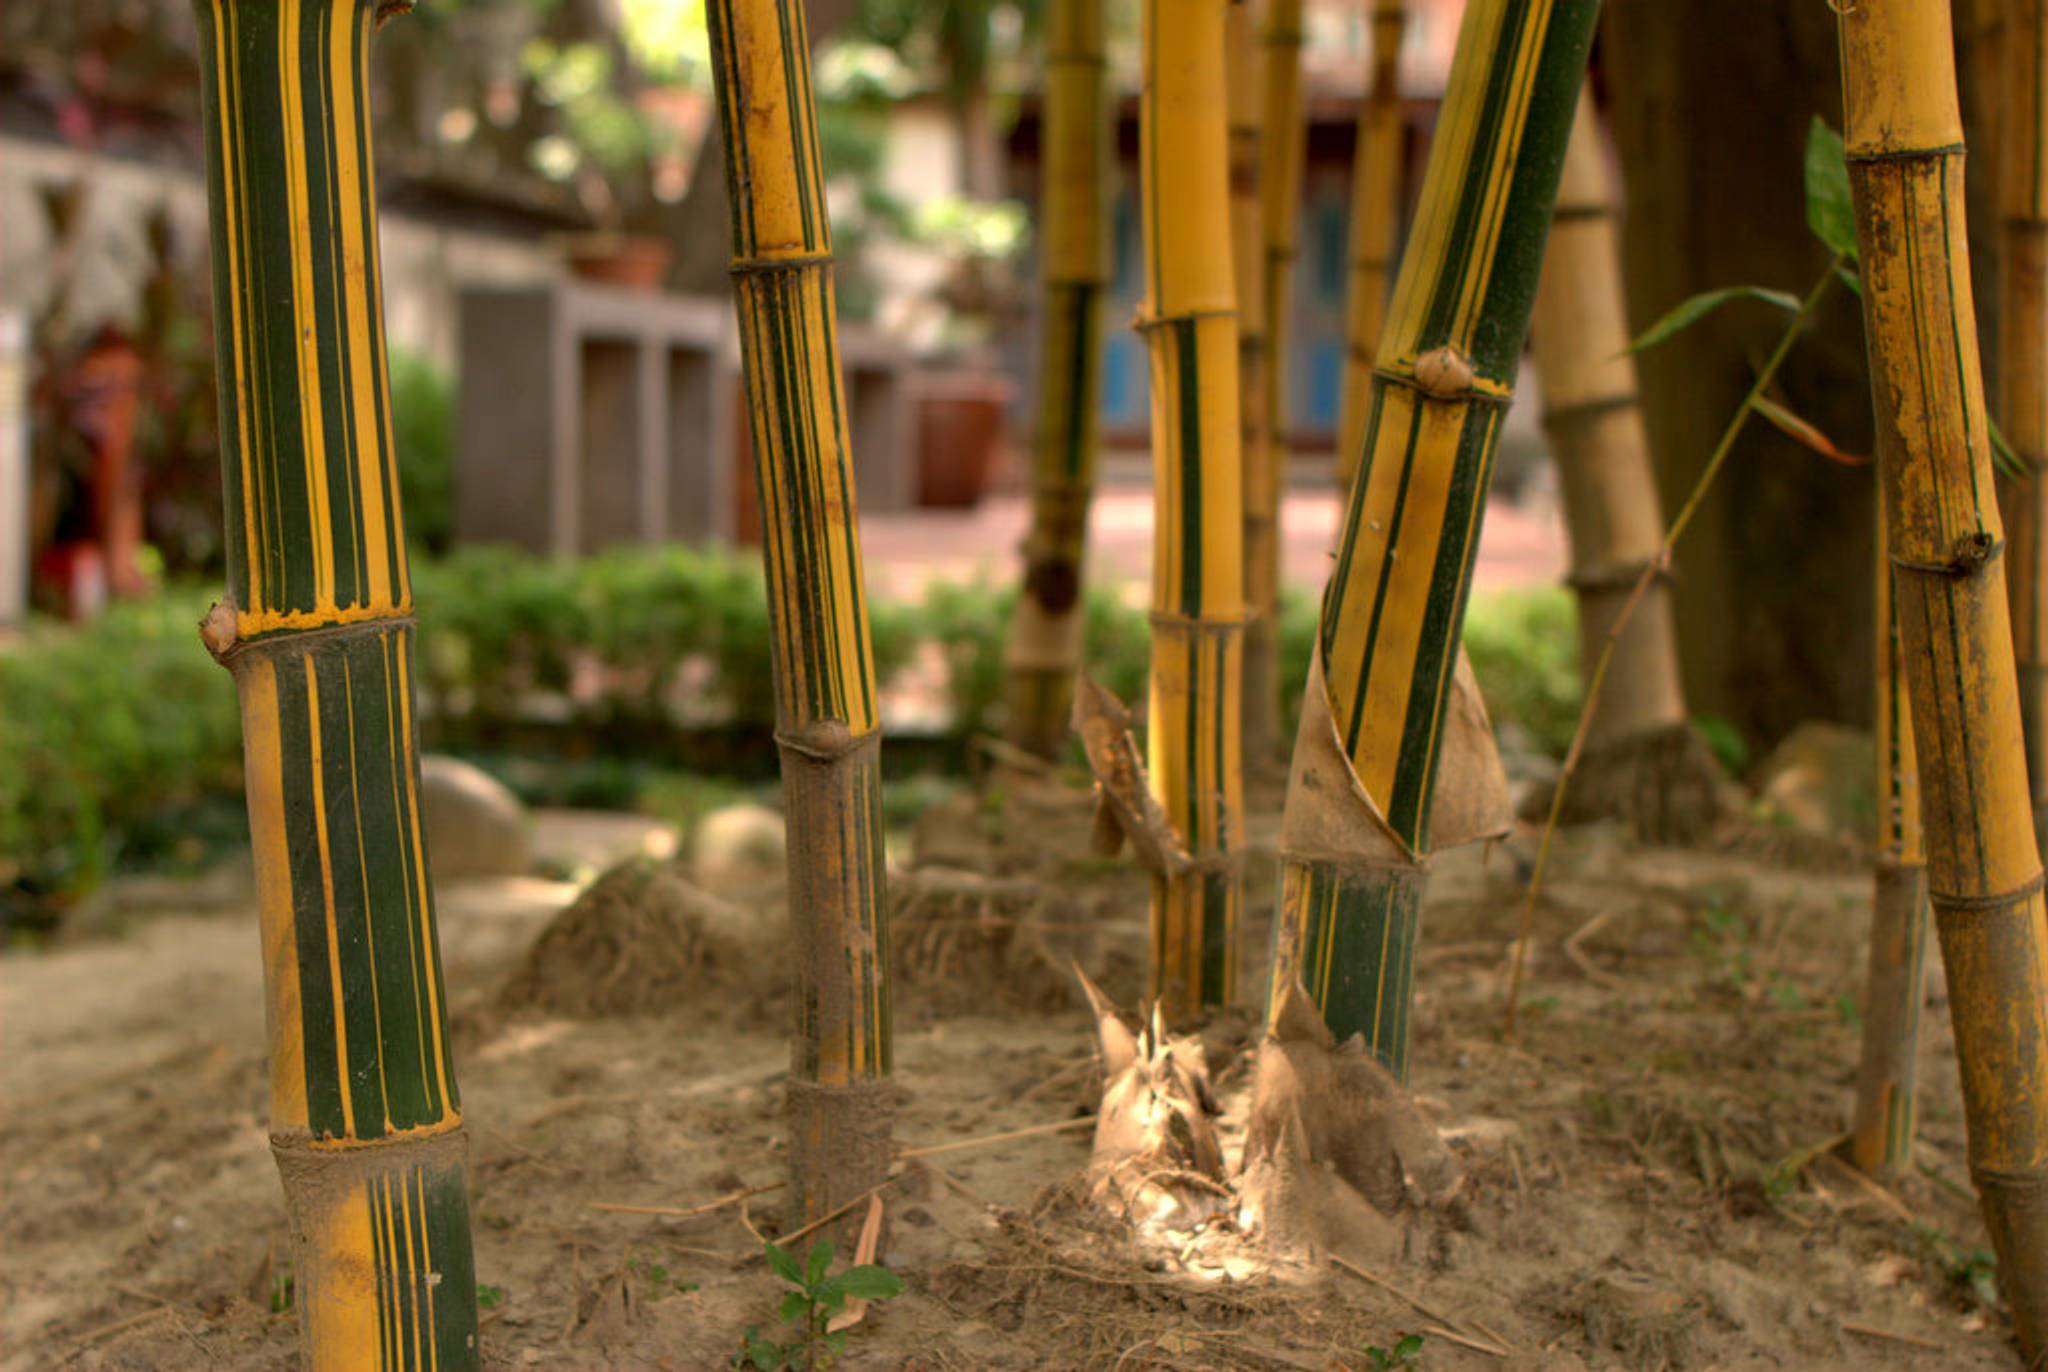 Bamboo is the new eco material of choice